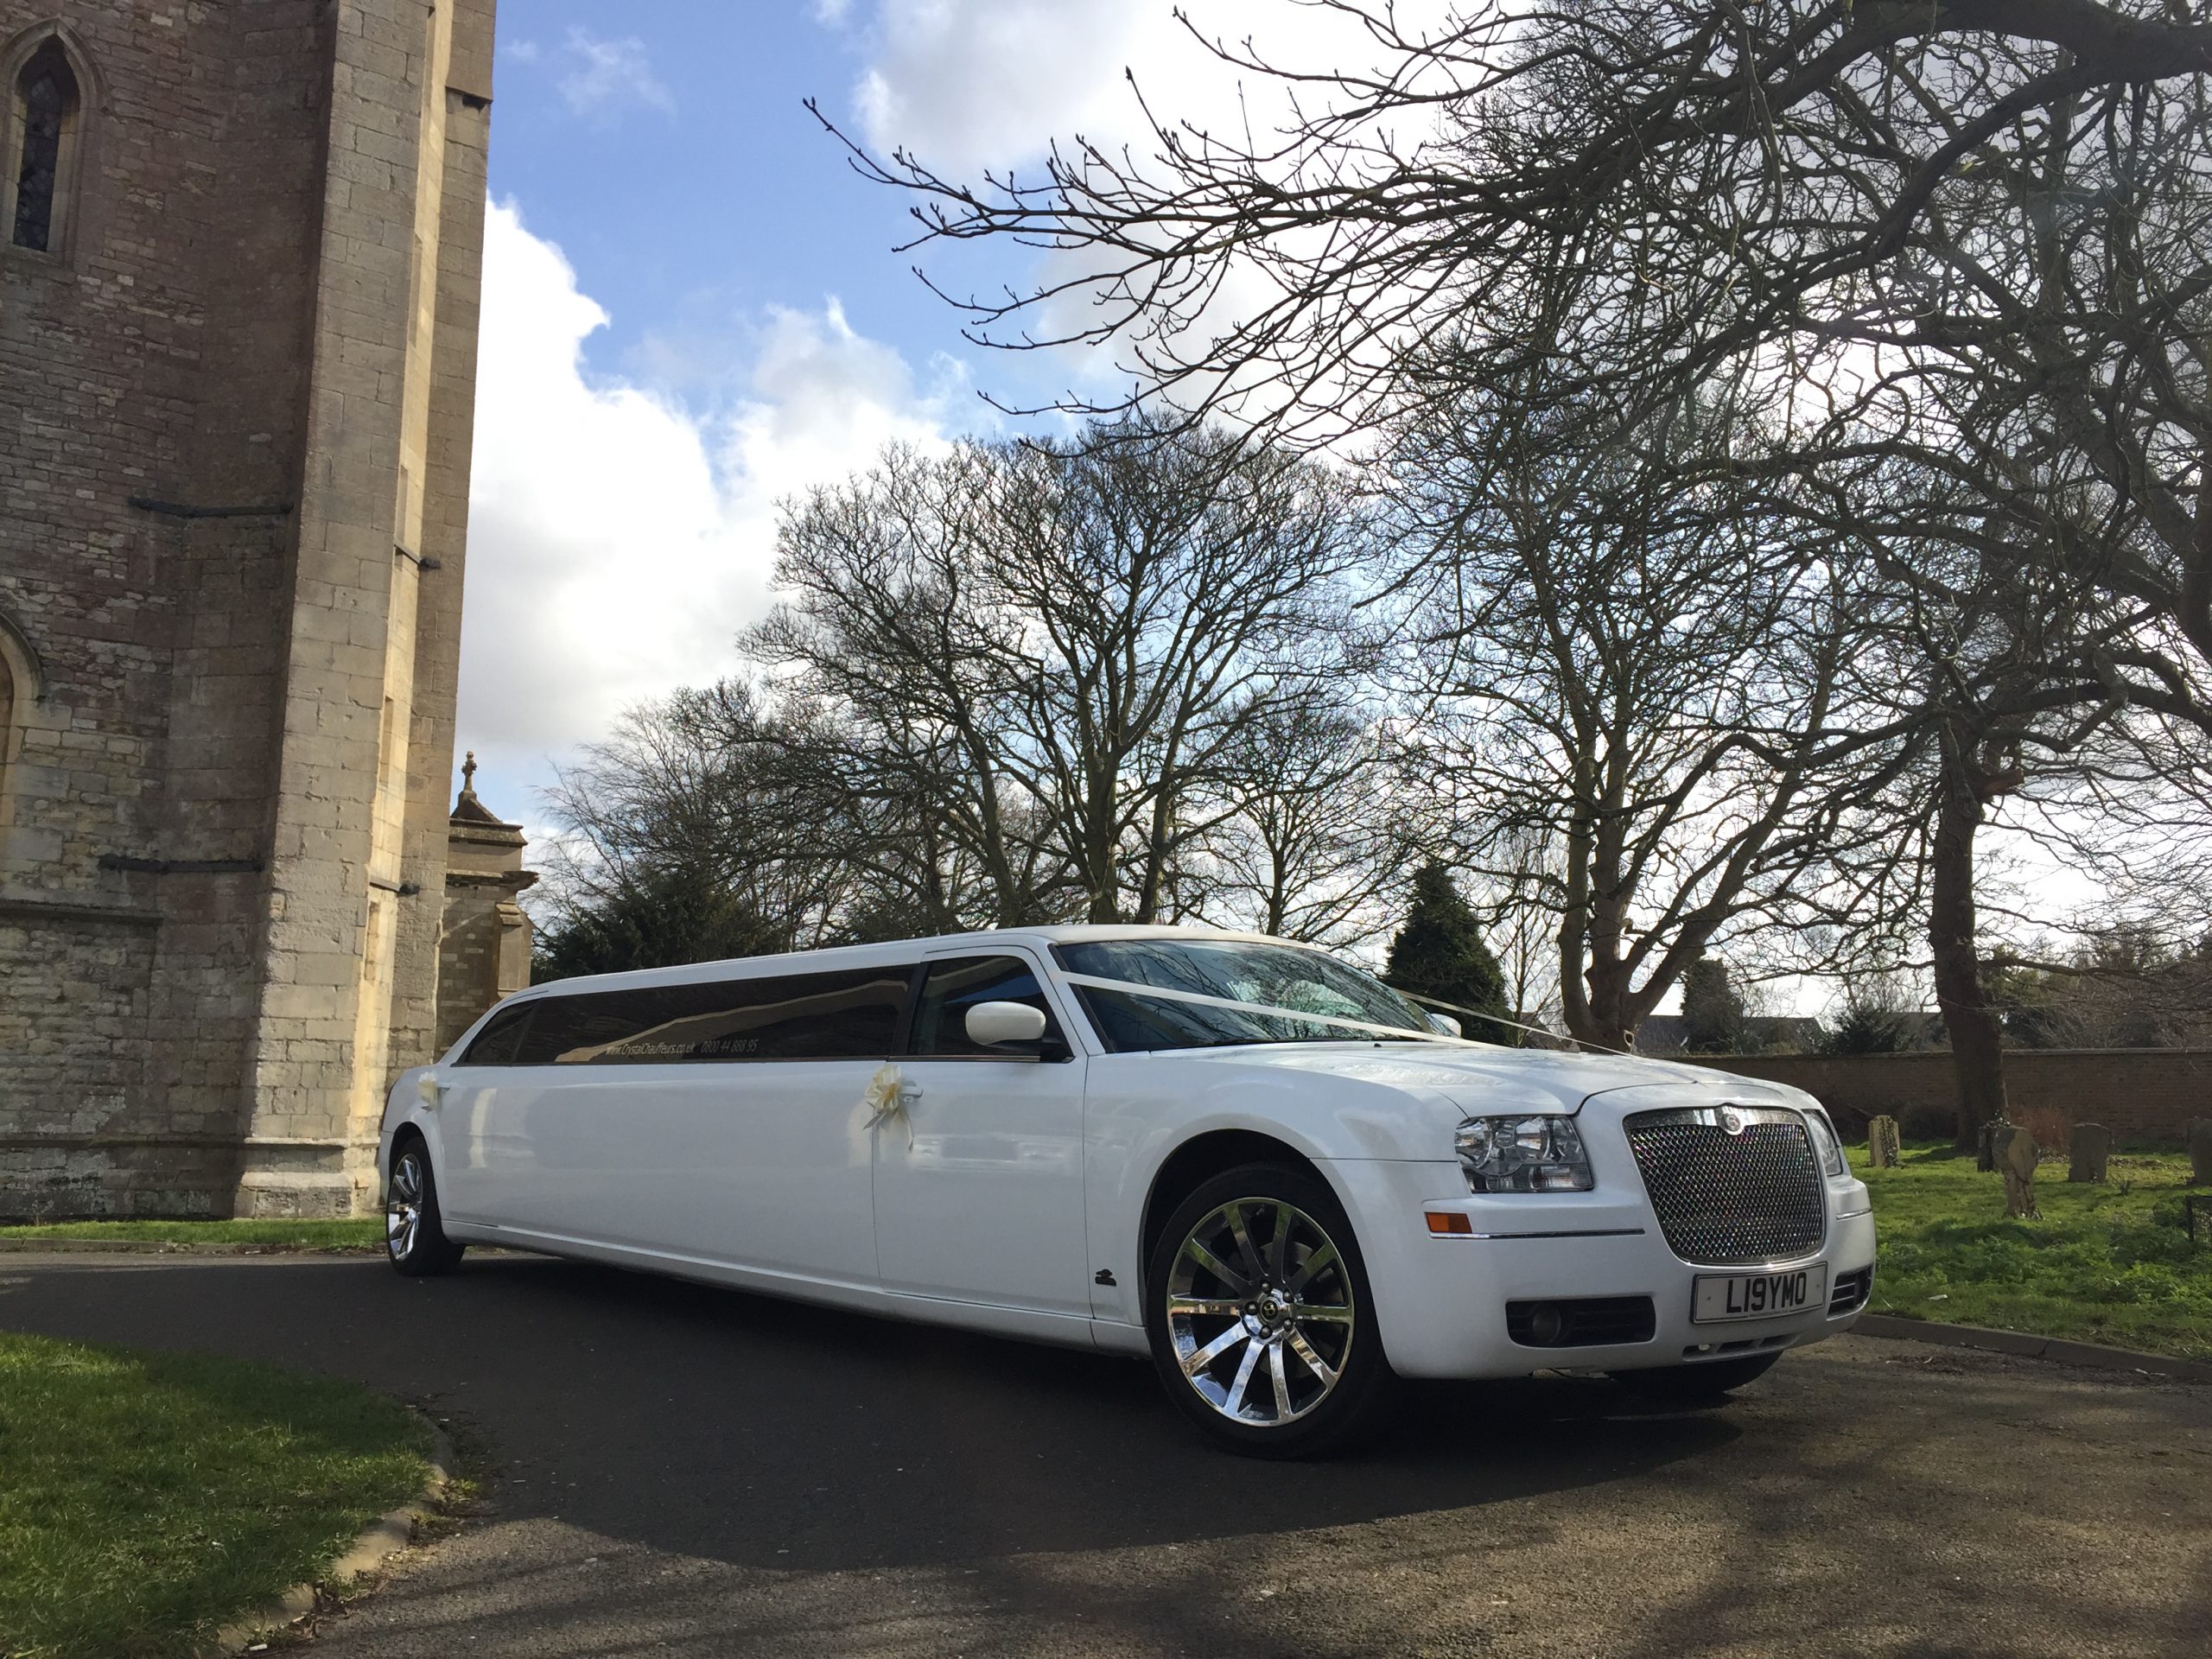 Wedding Limo Hire March